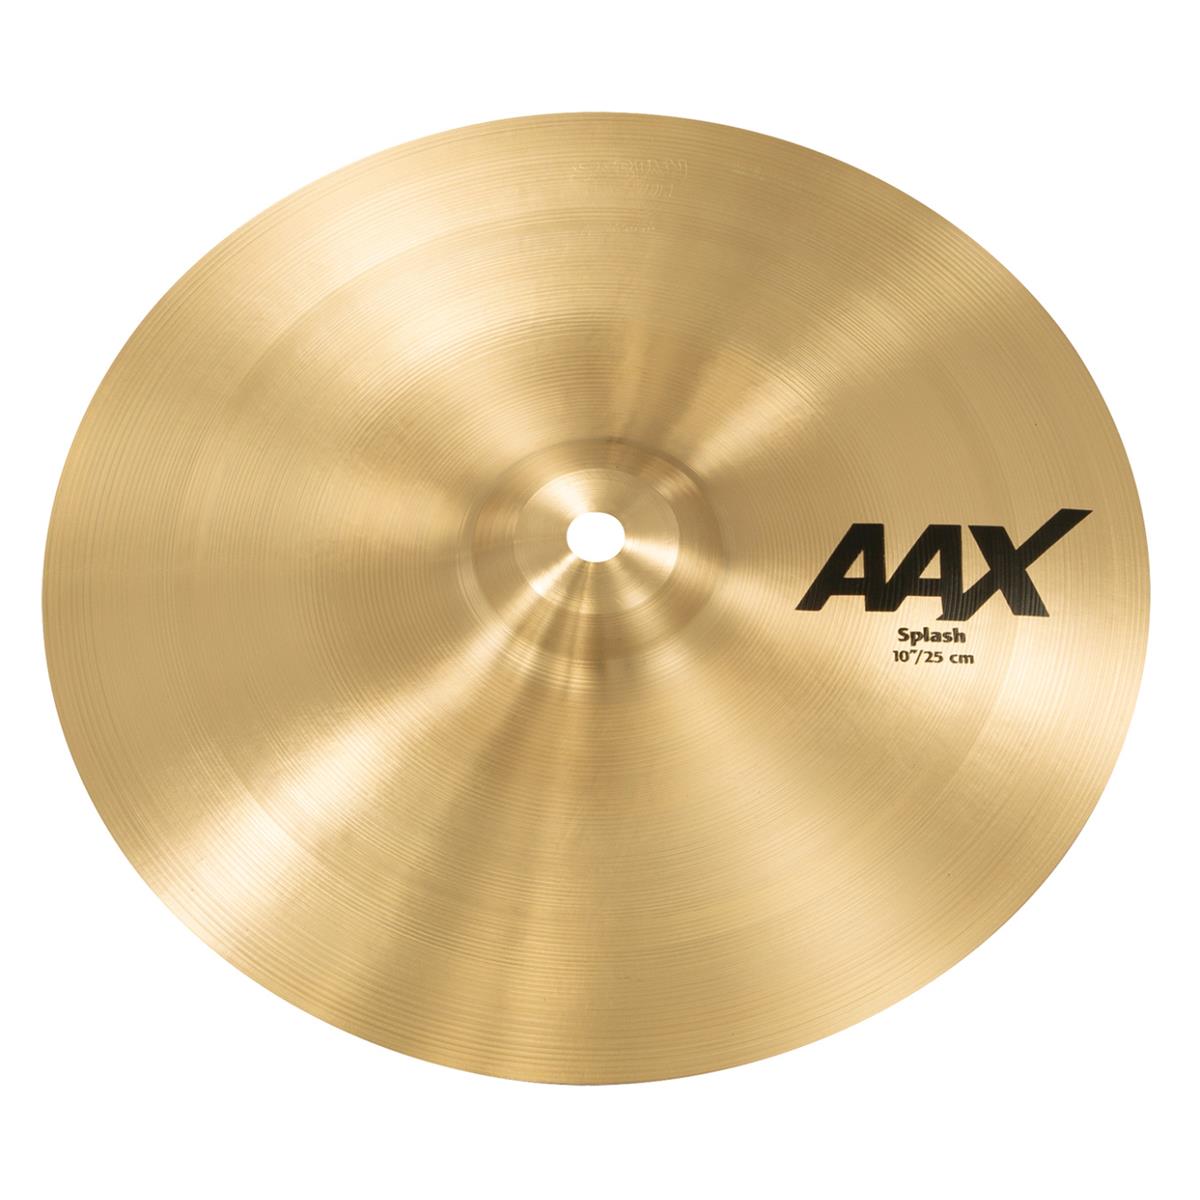 Sabian 10" AAX Splash Cymbal, Extra-Thin, Natural Finish Extremely fast and very bright, the SABIAN 10" AAX Splash provides plenty of penetrating cut. The SABIAN AAX series delivers consistently bright, crisp, clear and cutting responses - AAX is the ultimate Modern Bright sound!